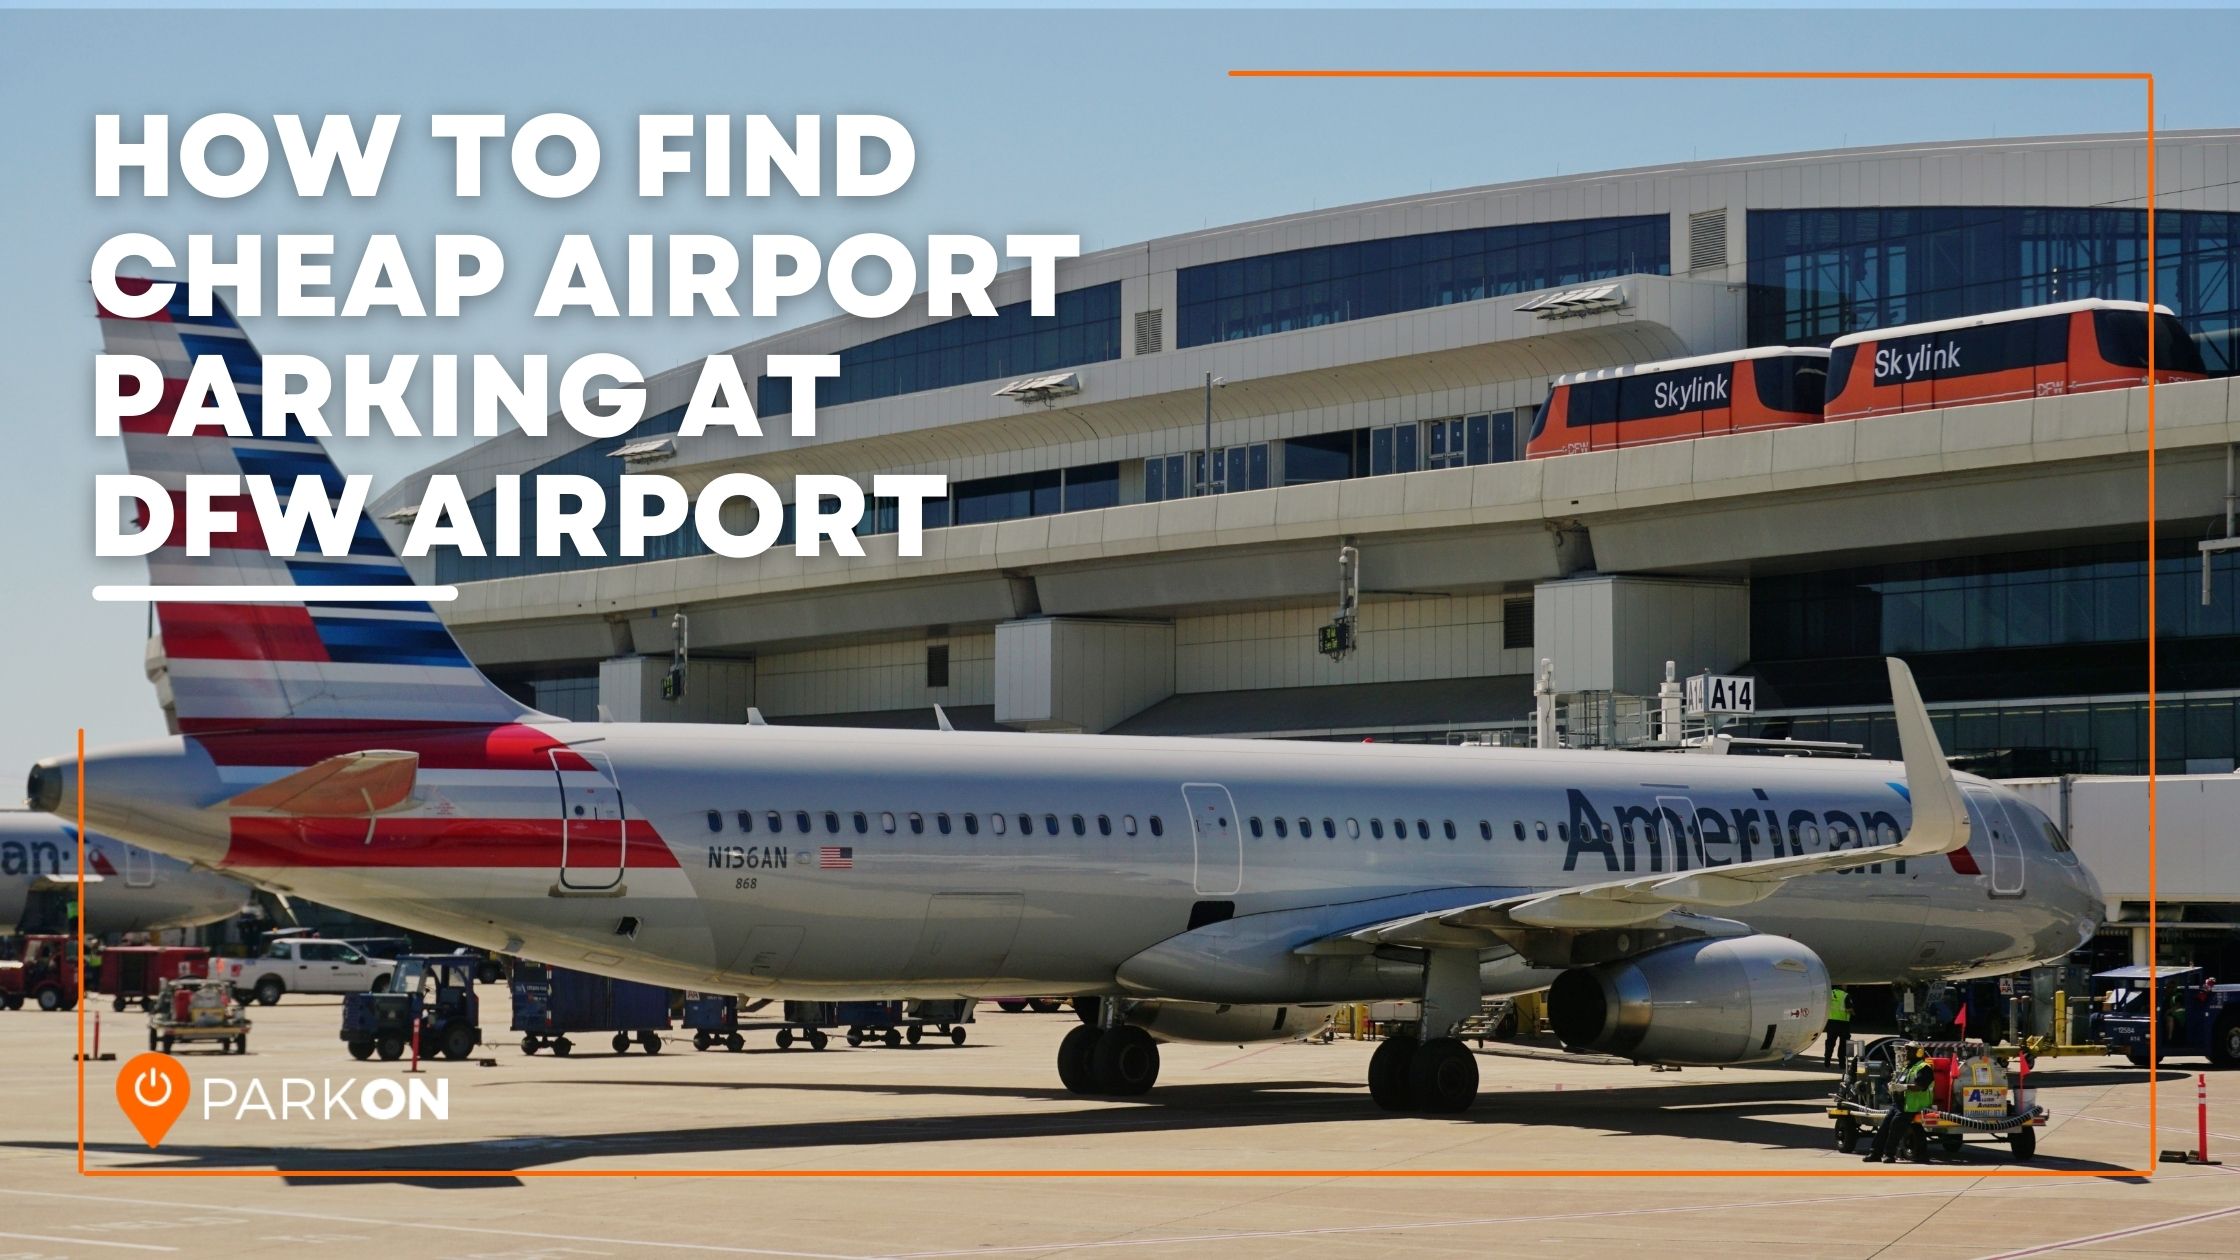 How to Find Cheap Airport Parking at Dallas Fort Worth Airport Banner